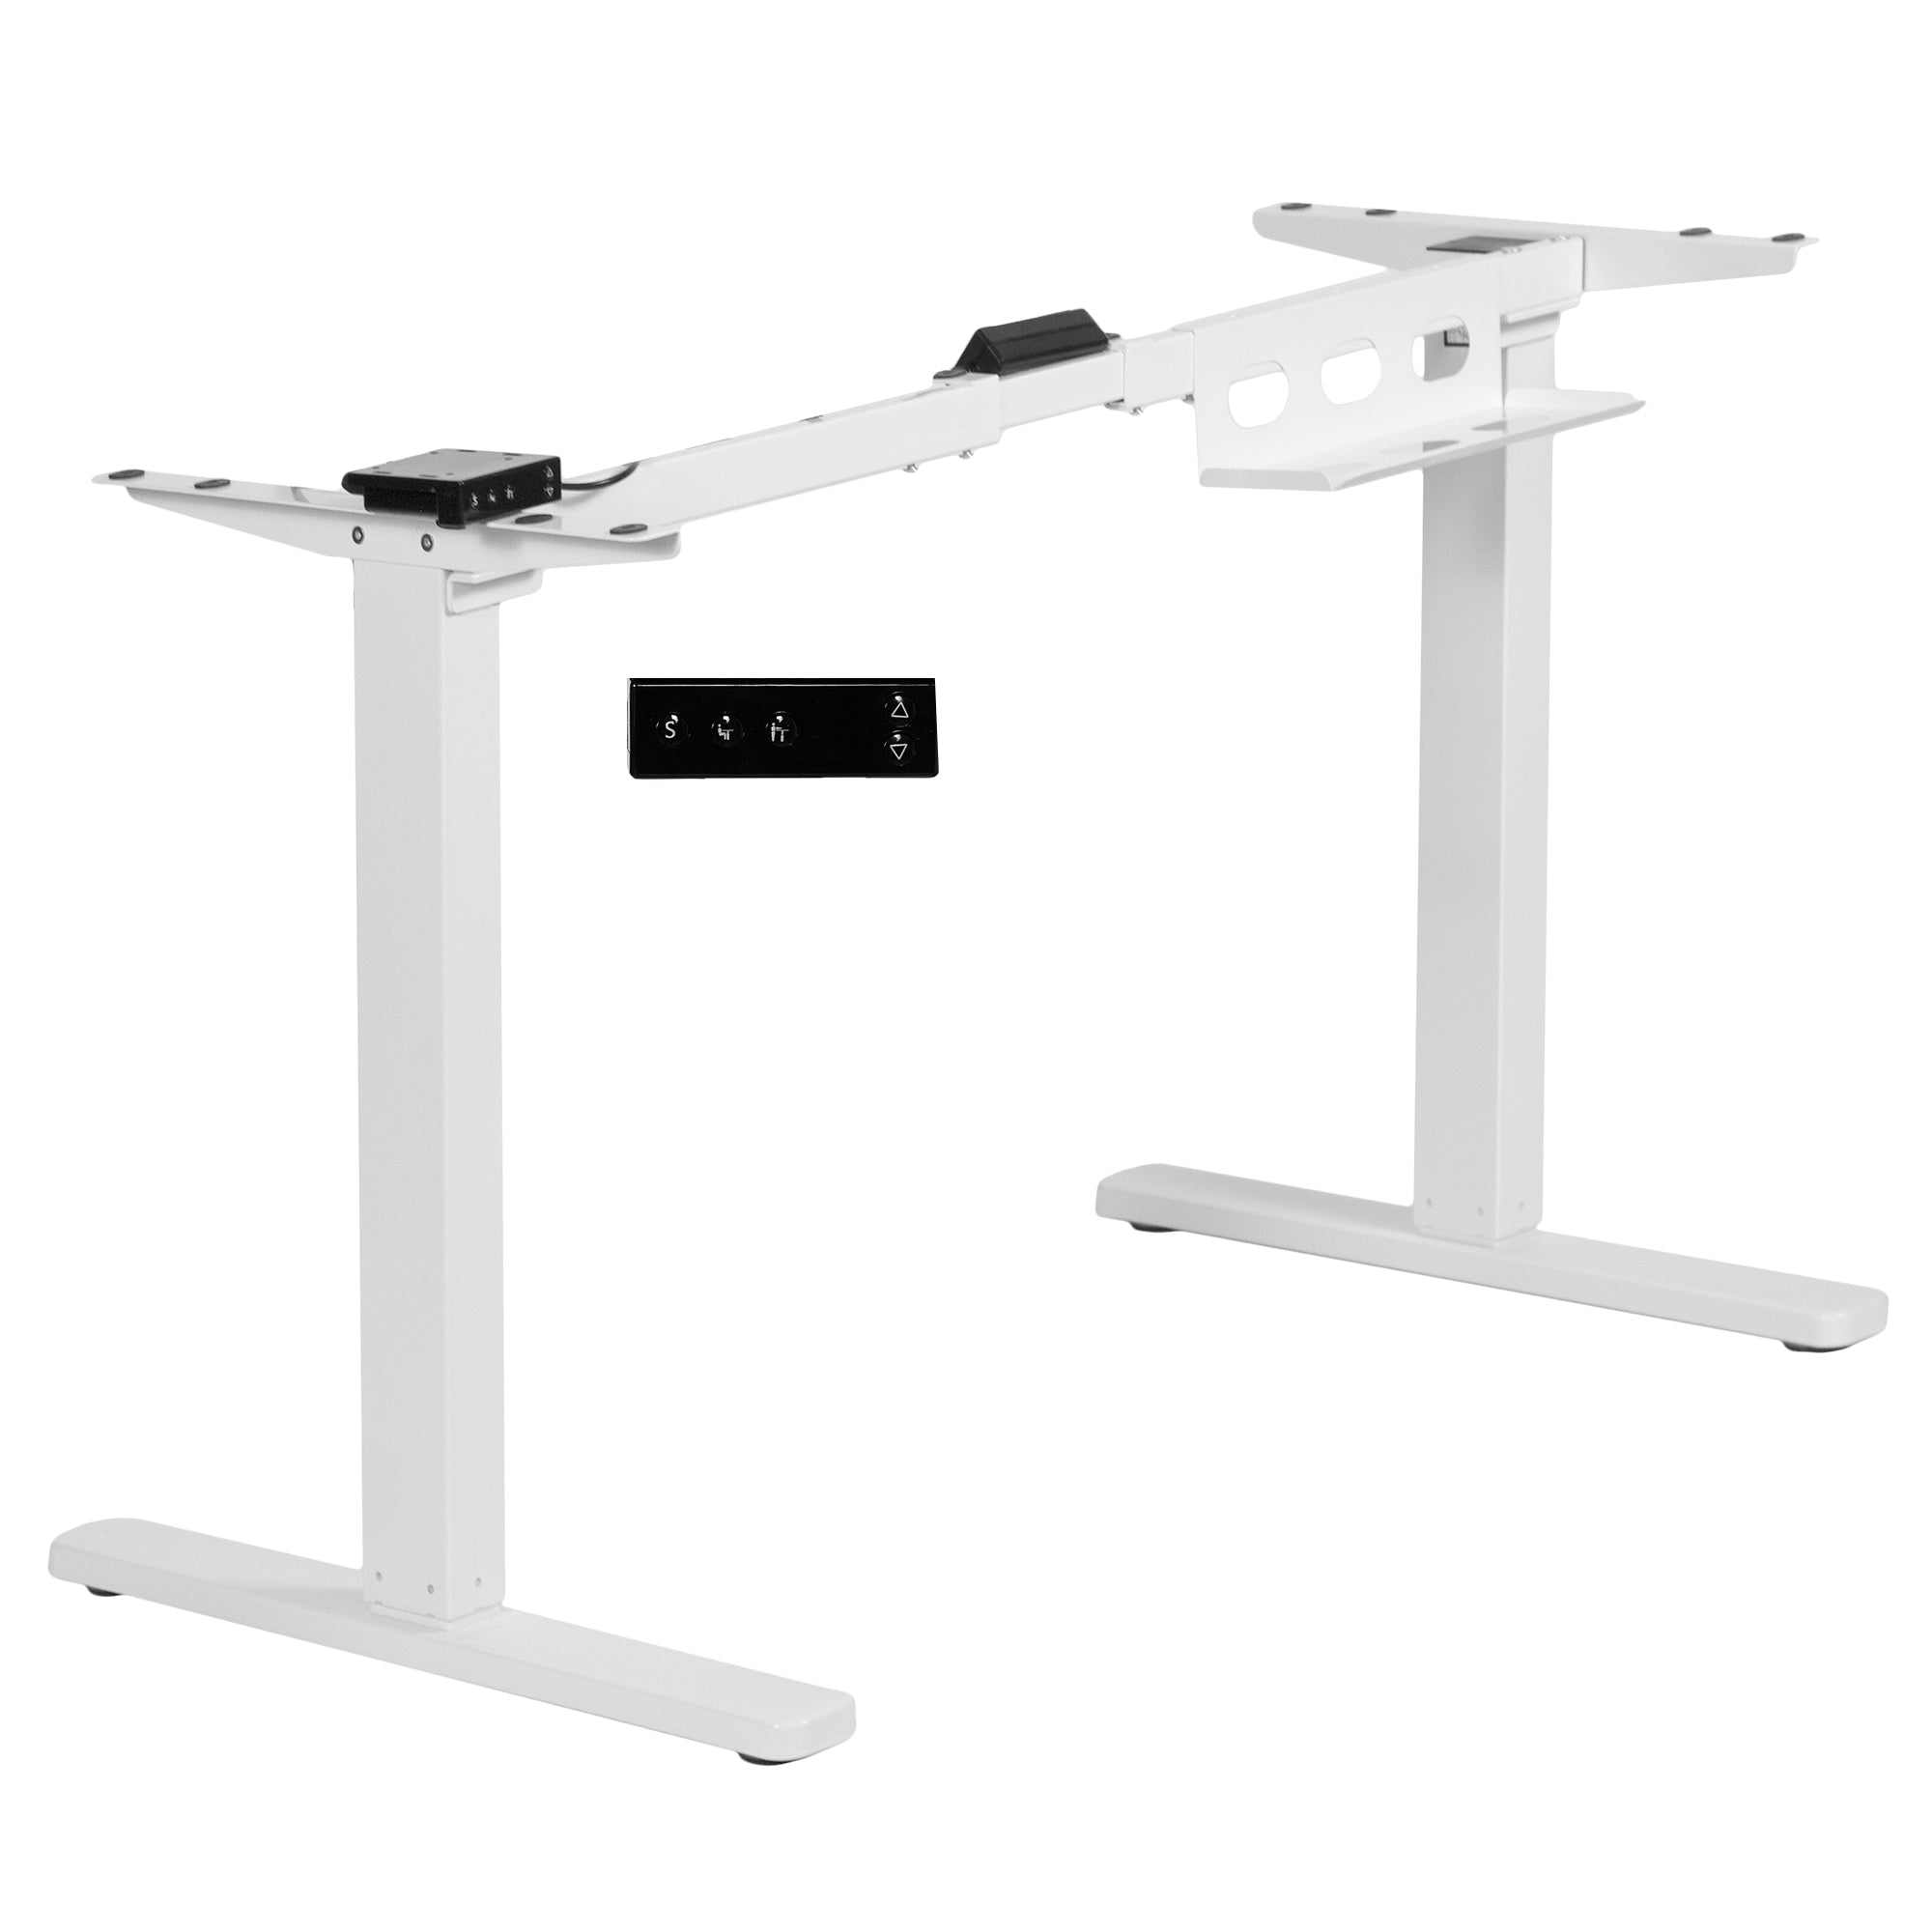 Electric Single Motor Desk Frame with Simple Memory Controller